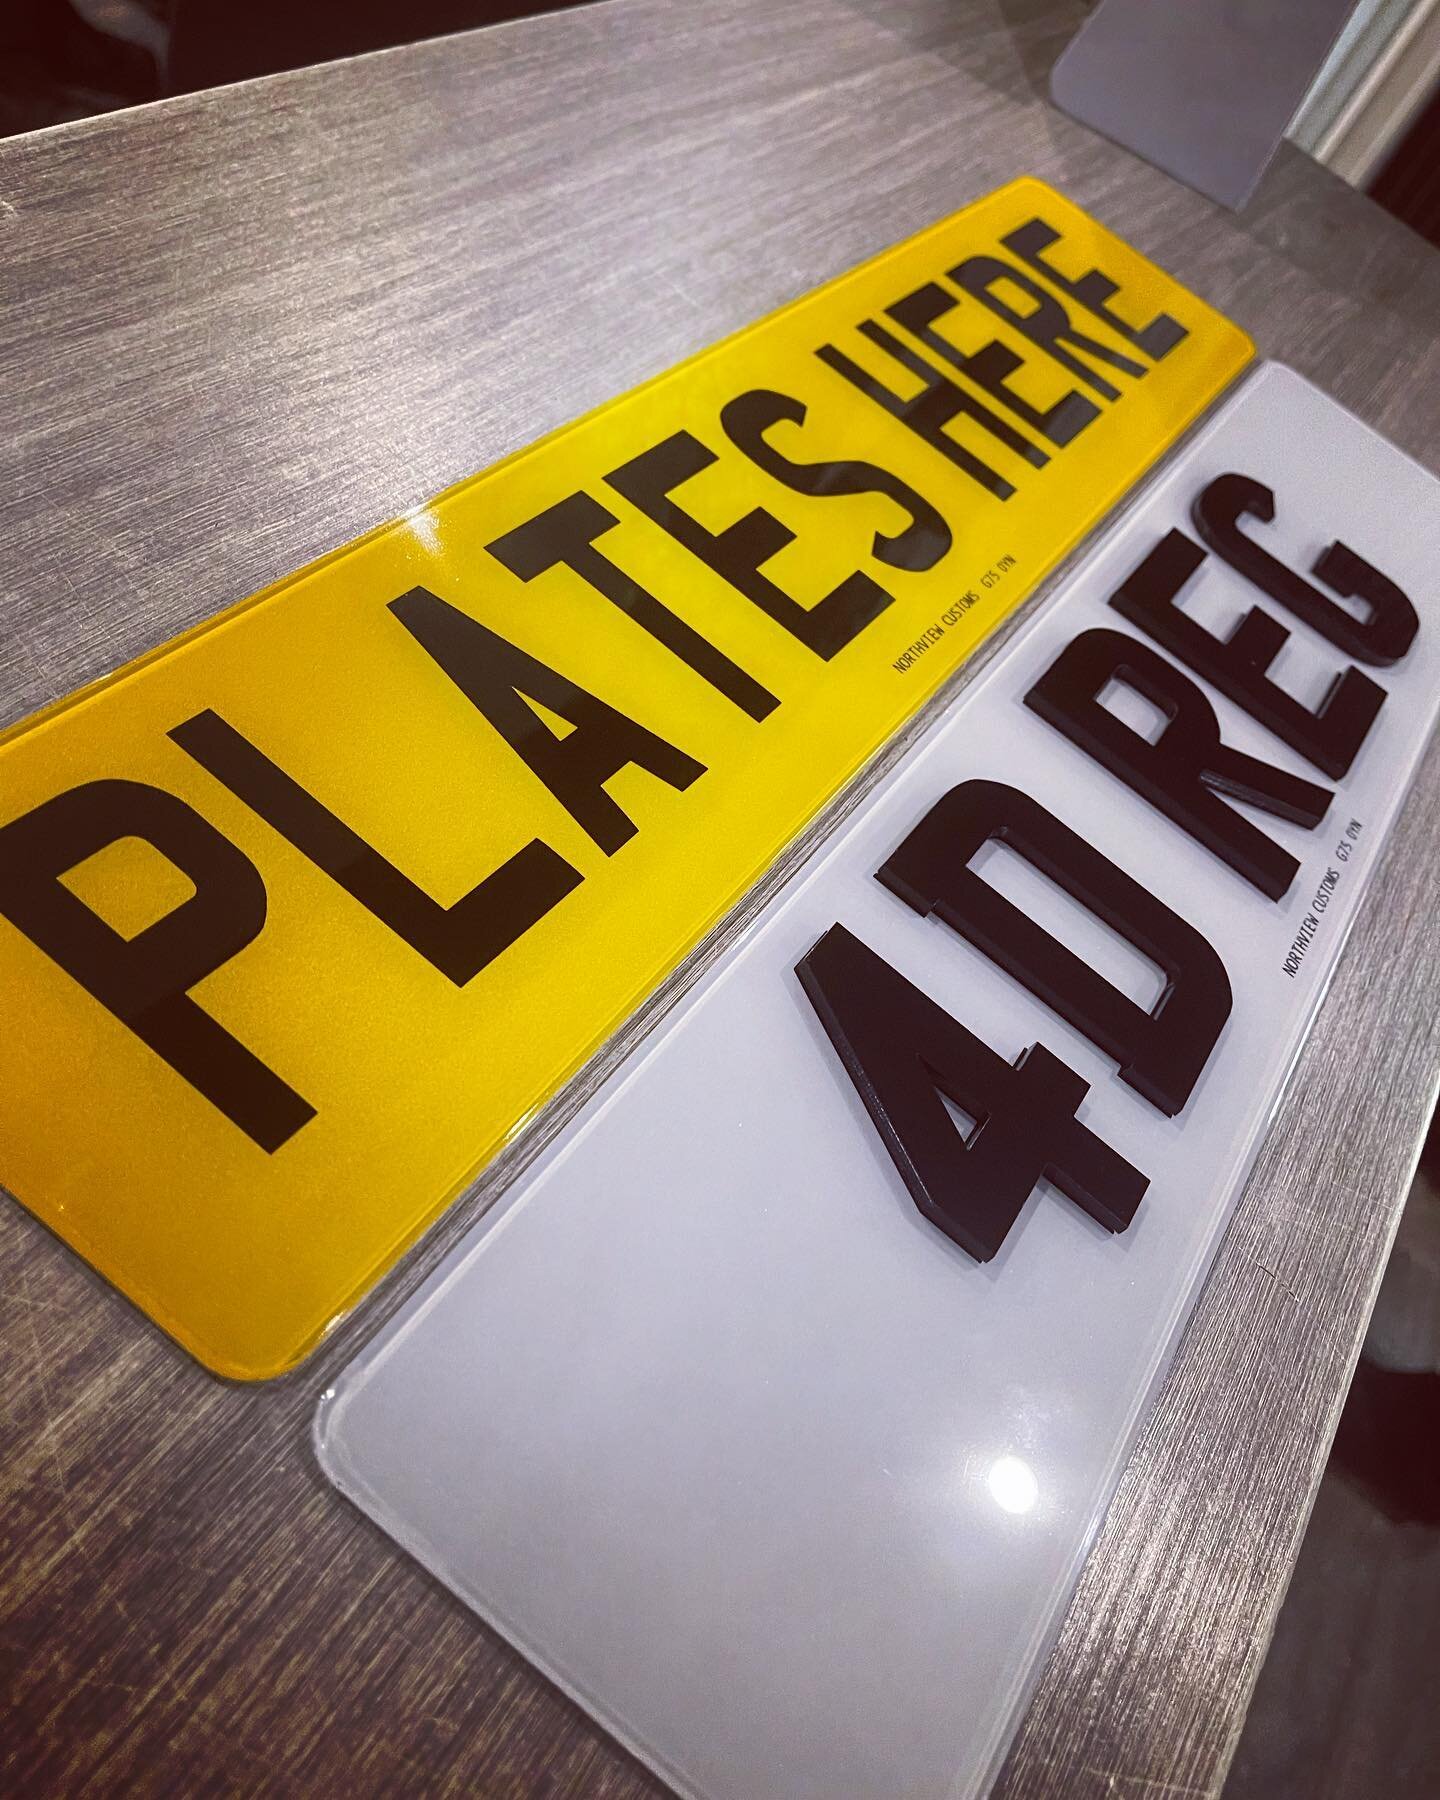 Looking for new registration plates? 
Add them to your booking or visit us in East Kilbride 
Standard Registration Plates ✅
4D Registration Plates ✅
Show Plates ✅

#eastkilbride #glasgow #lanarkshire #scotland #regplate